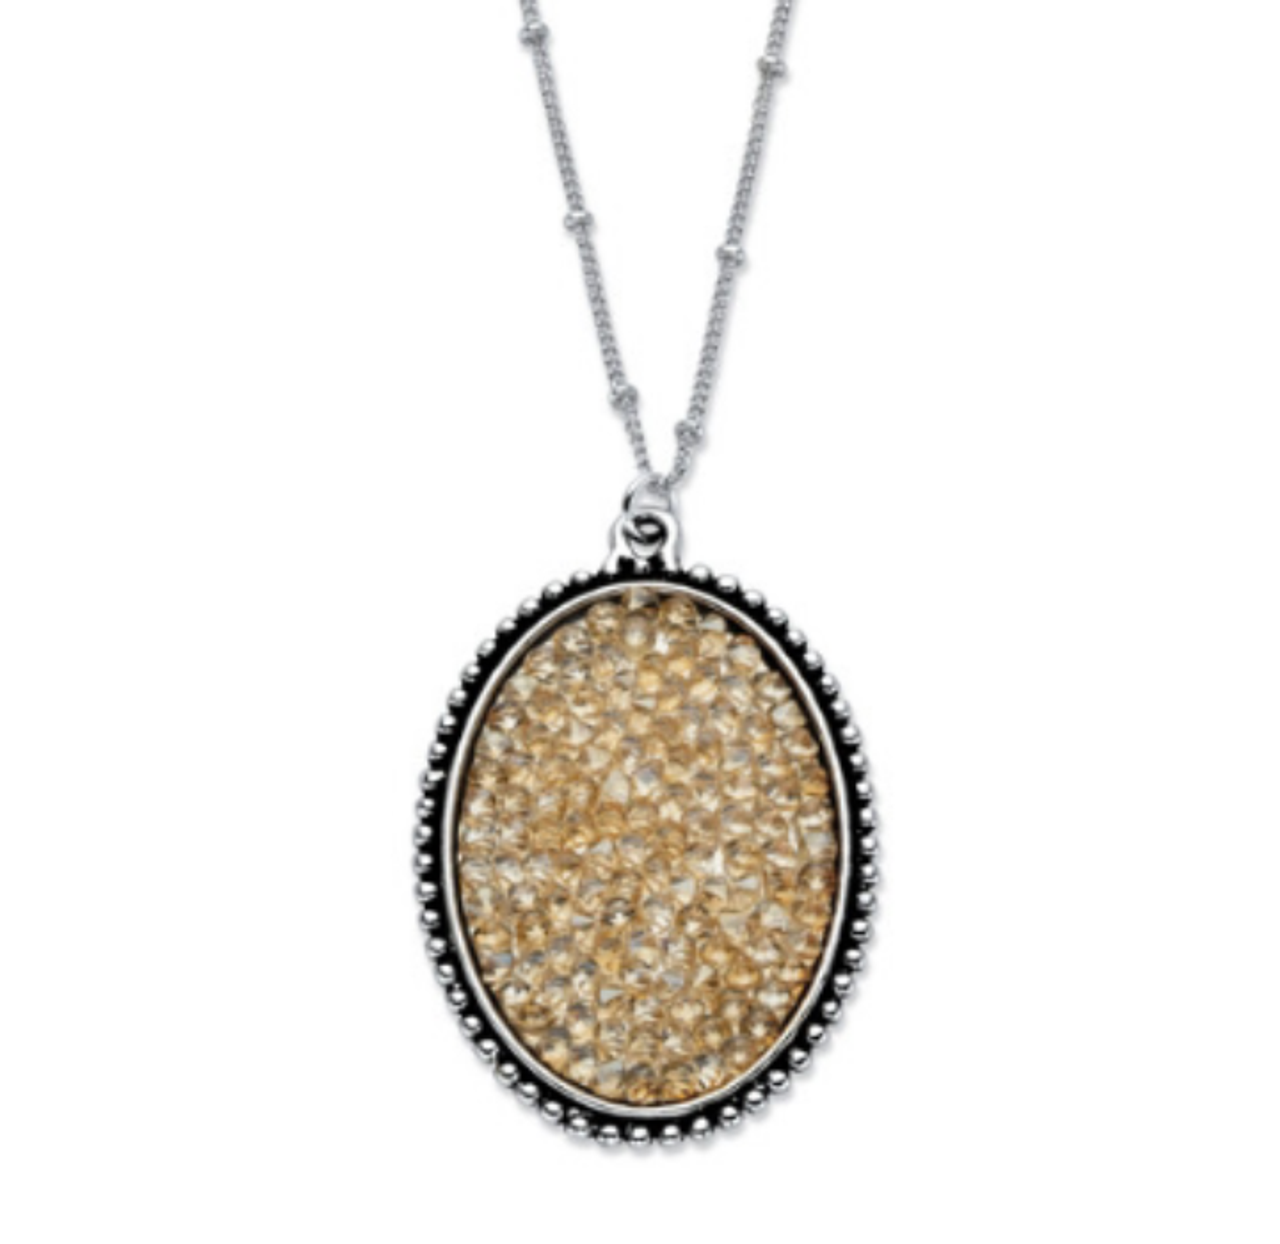 Butterscotch Crystal Oval Pendant Necklace with Beaded Chain product image